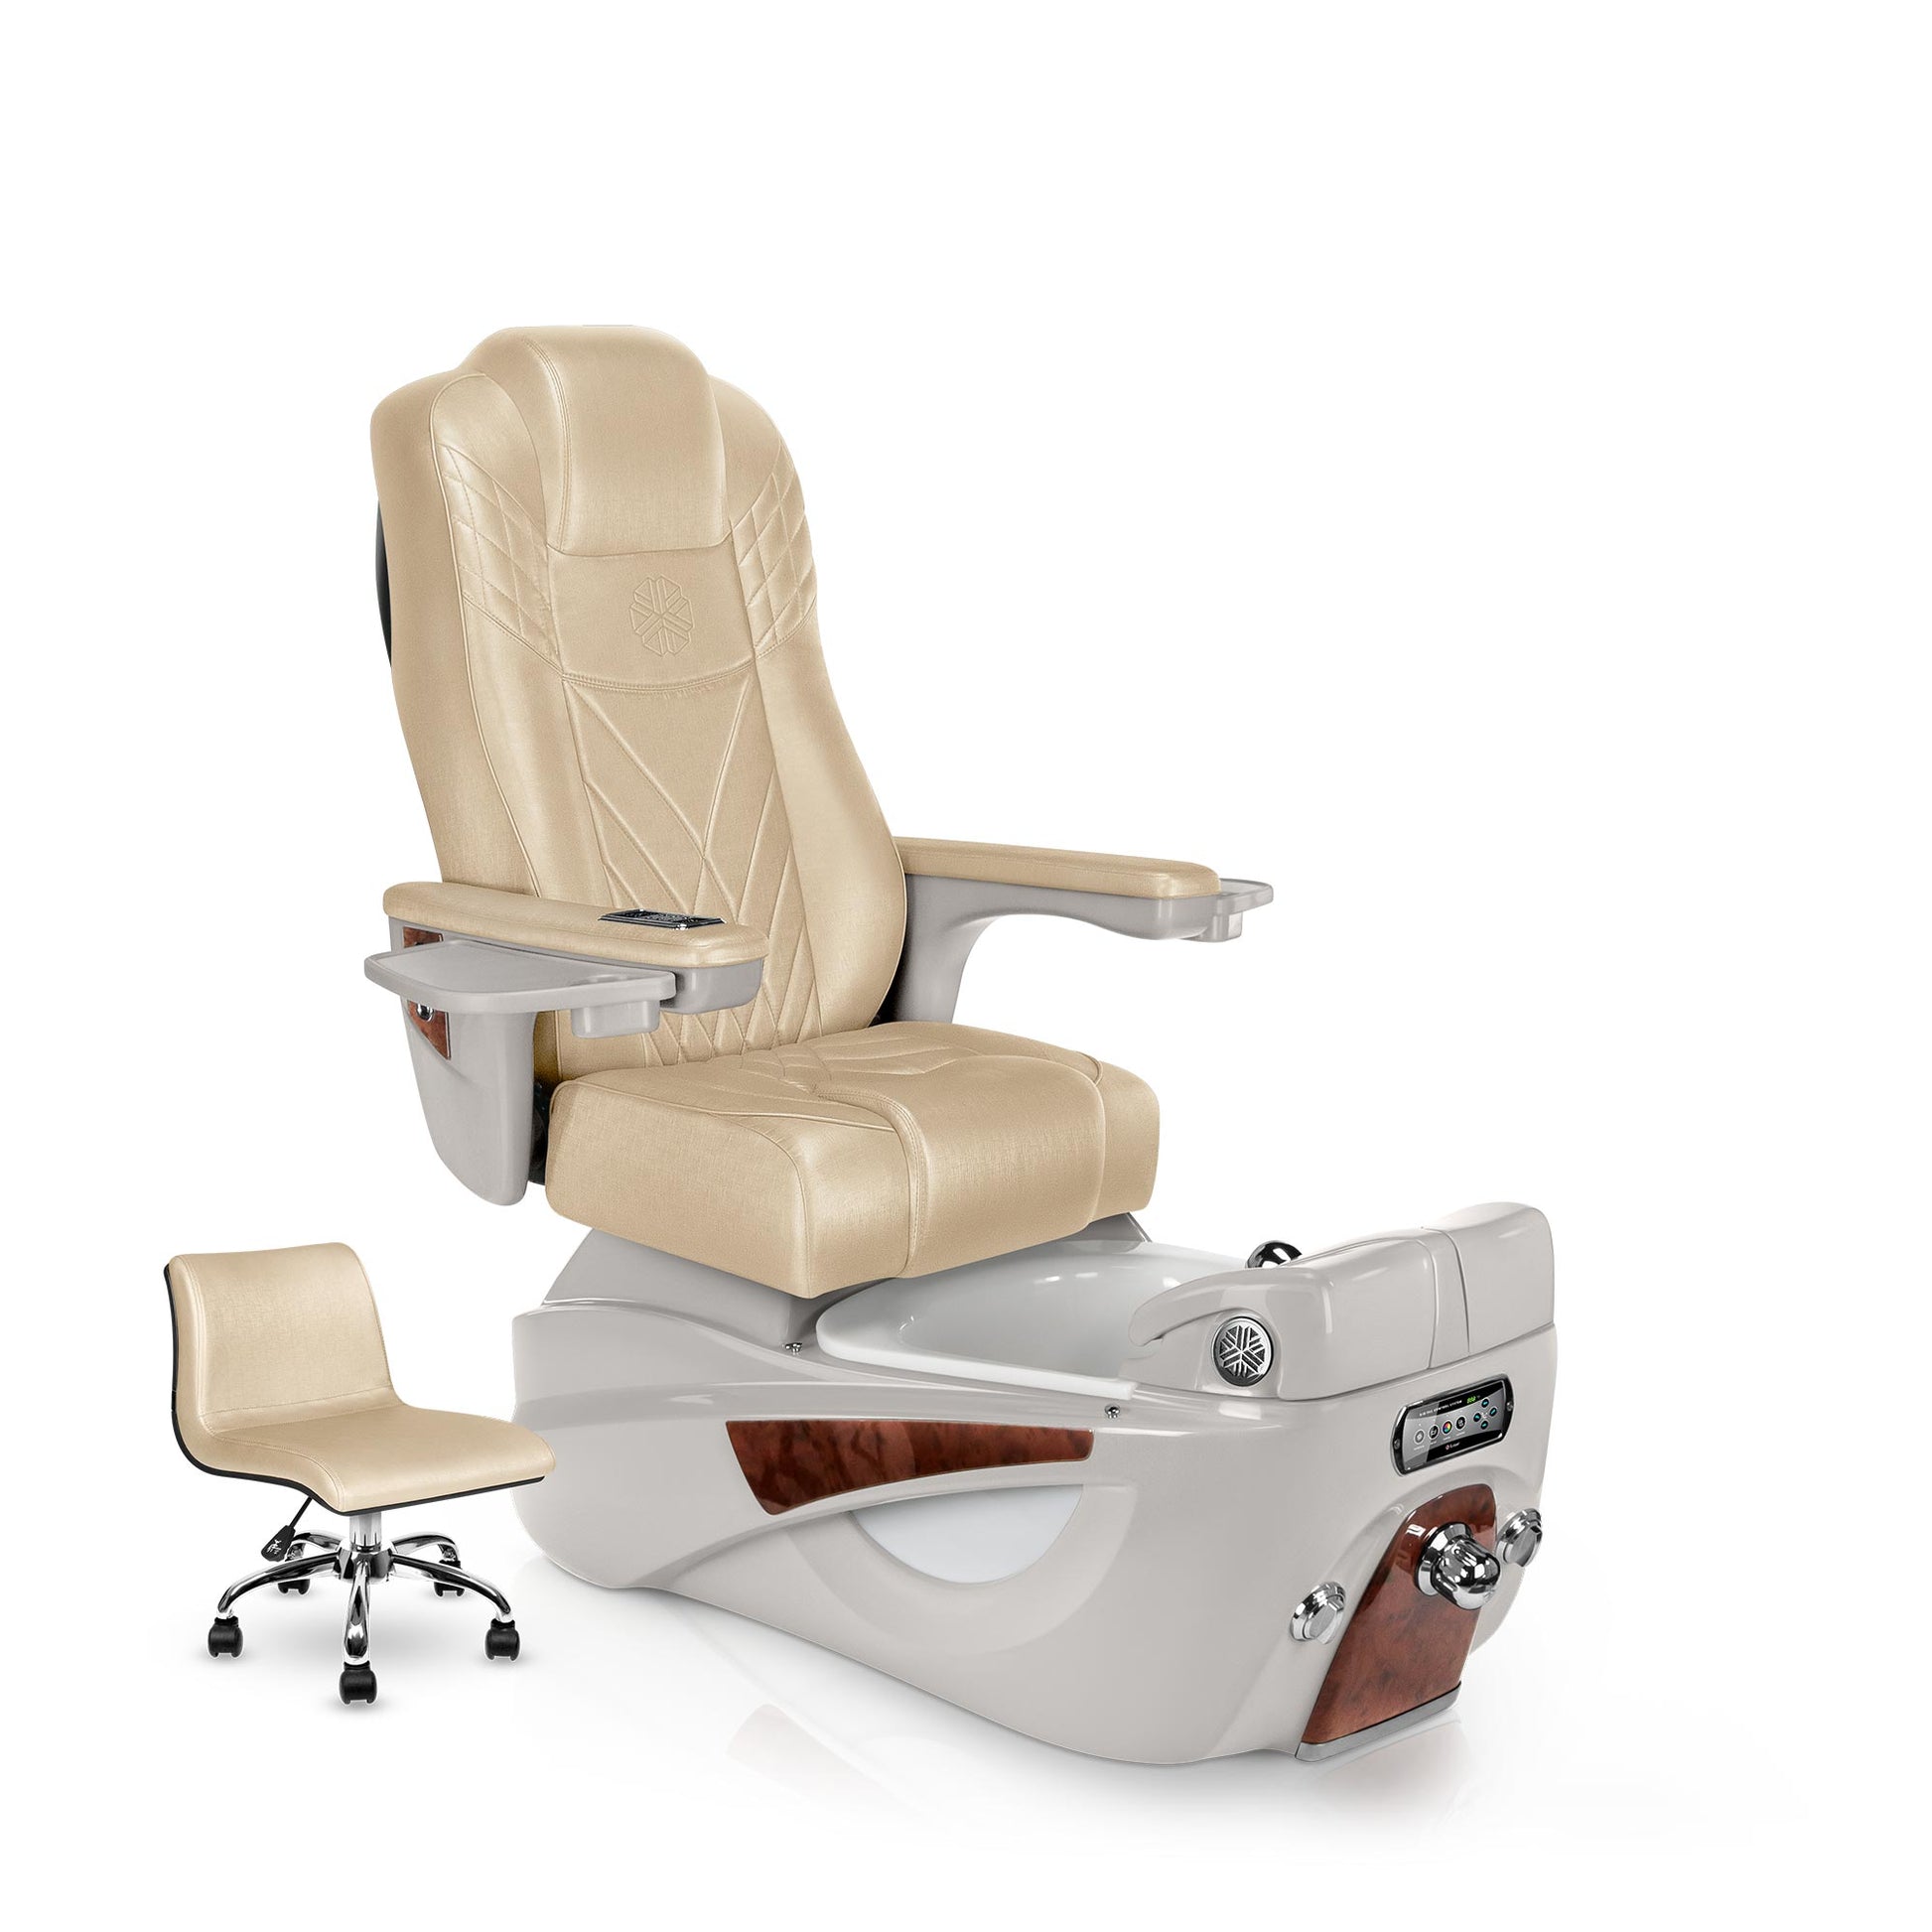 Lexor LUMINOUS pedicure chair with glazed gold cushion and sandstone spa base